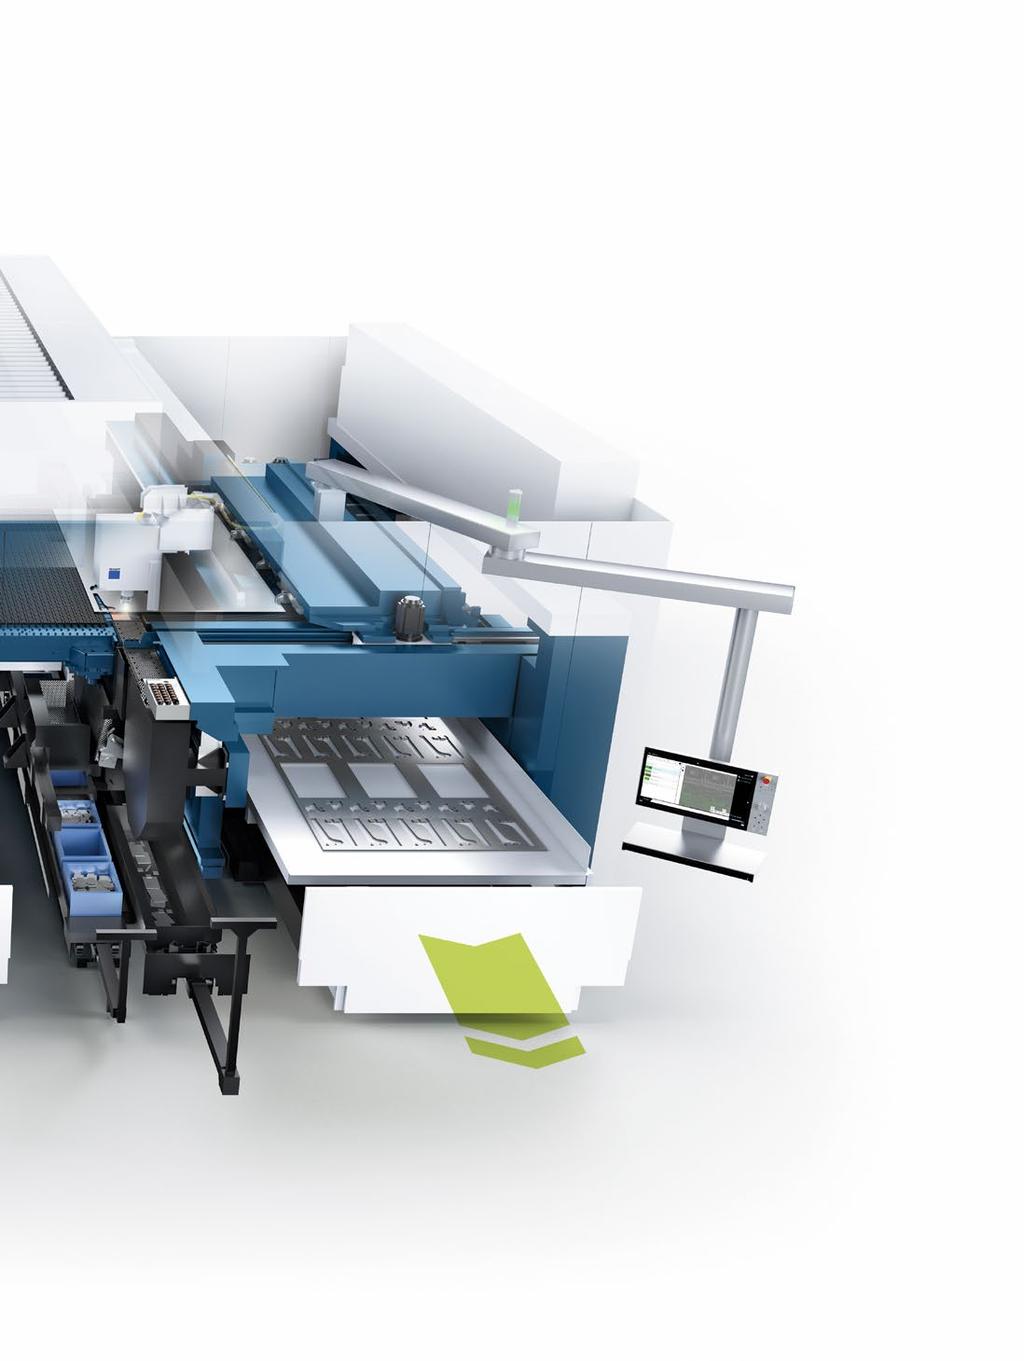 Center 7030 Products 41 The Center 7030 integrates for the first time ever all of the laser cutting processes in one single machine.